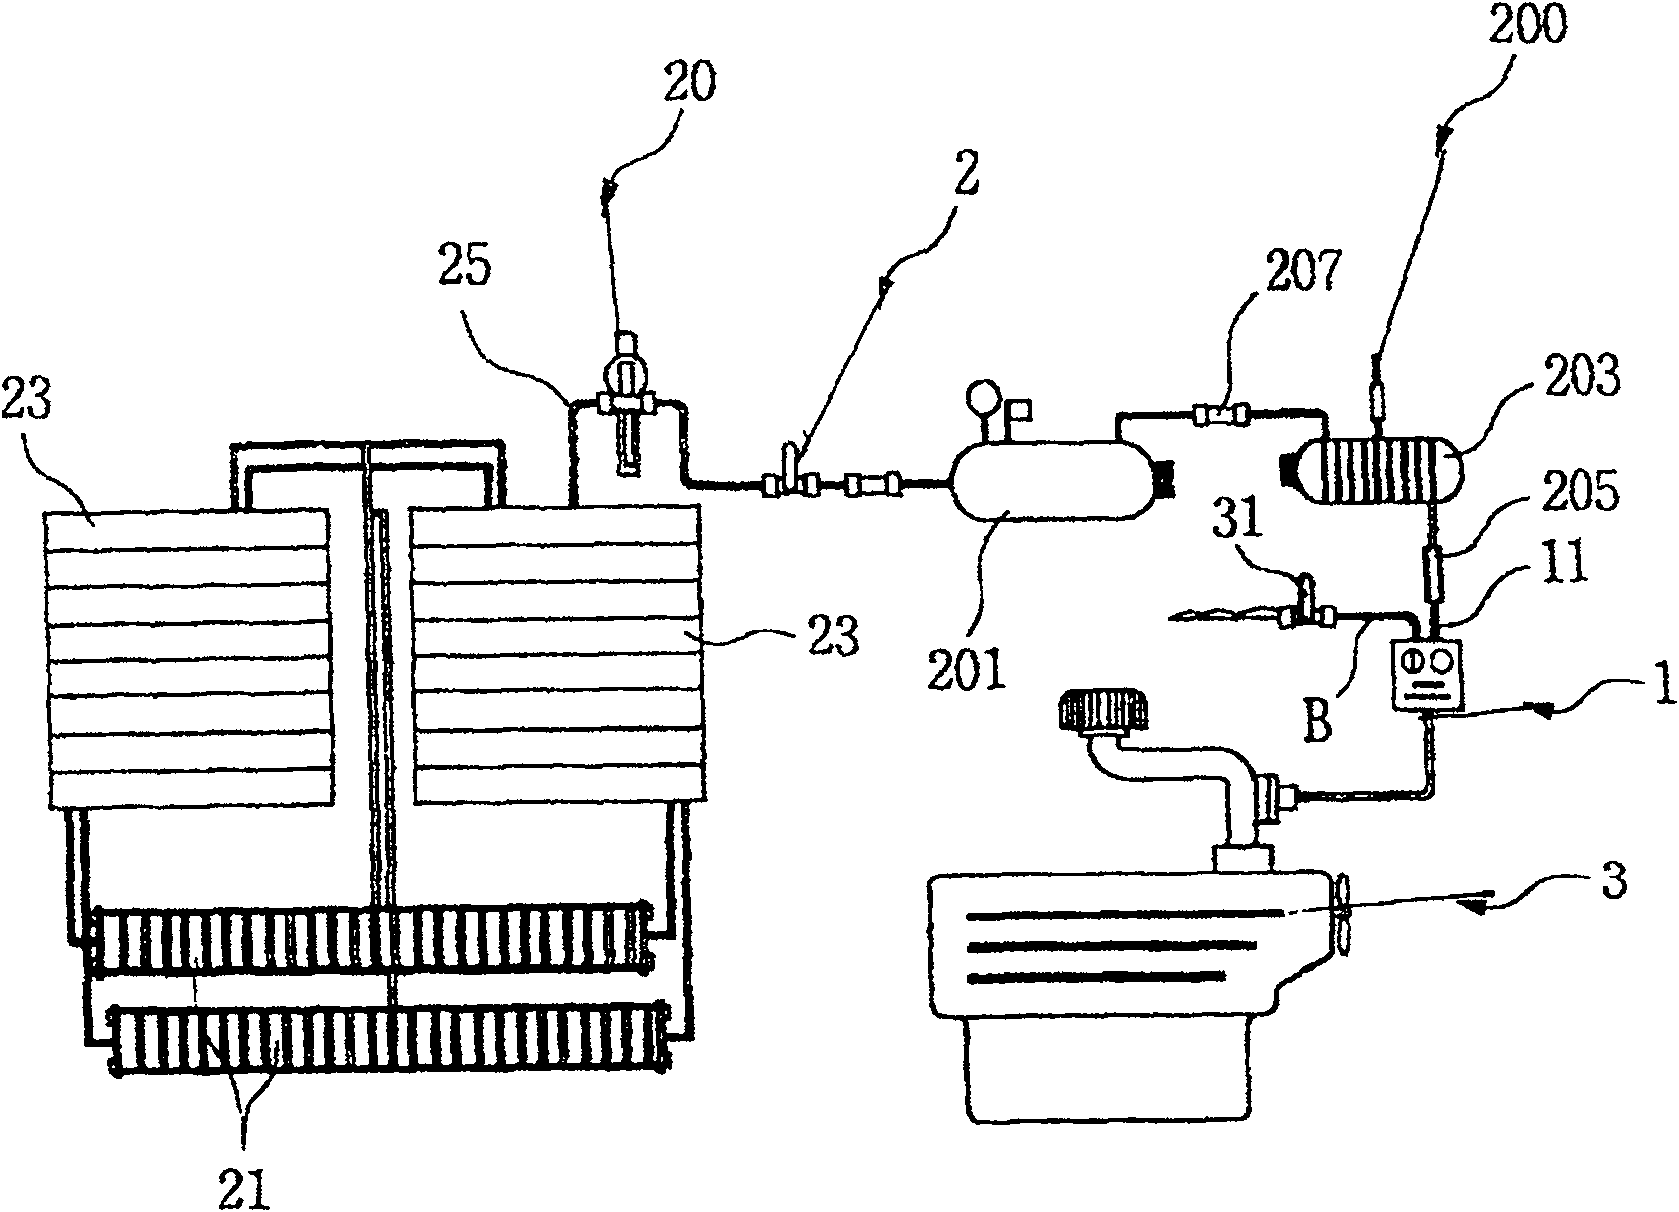 Aqueous oxyhydrogen gas generator for use in IC engine